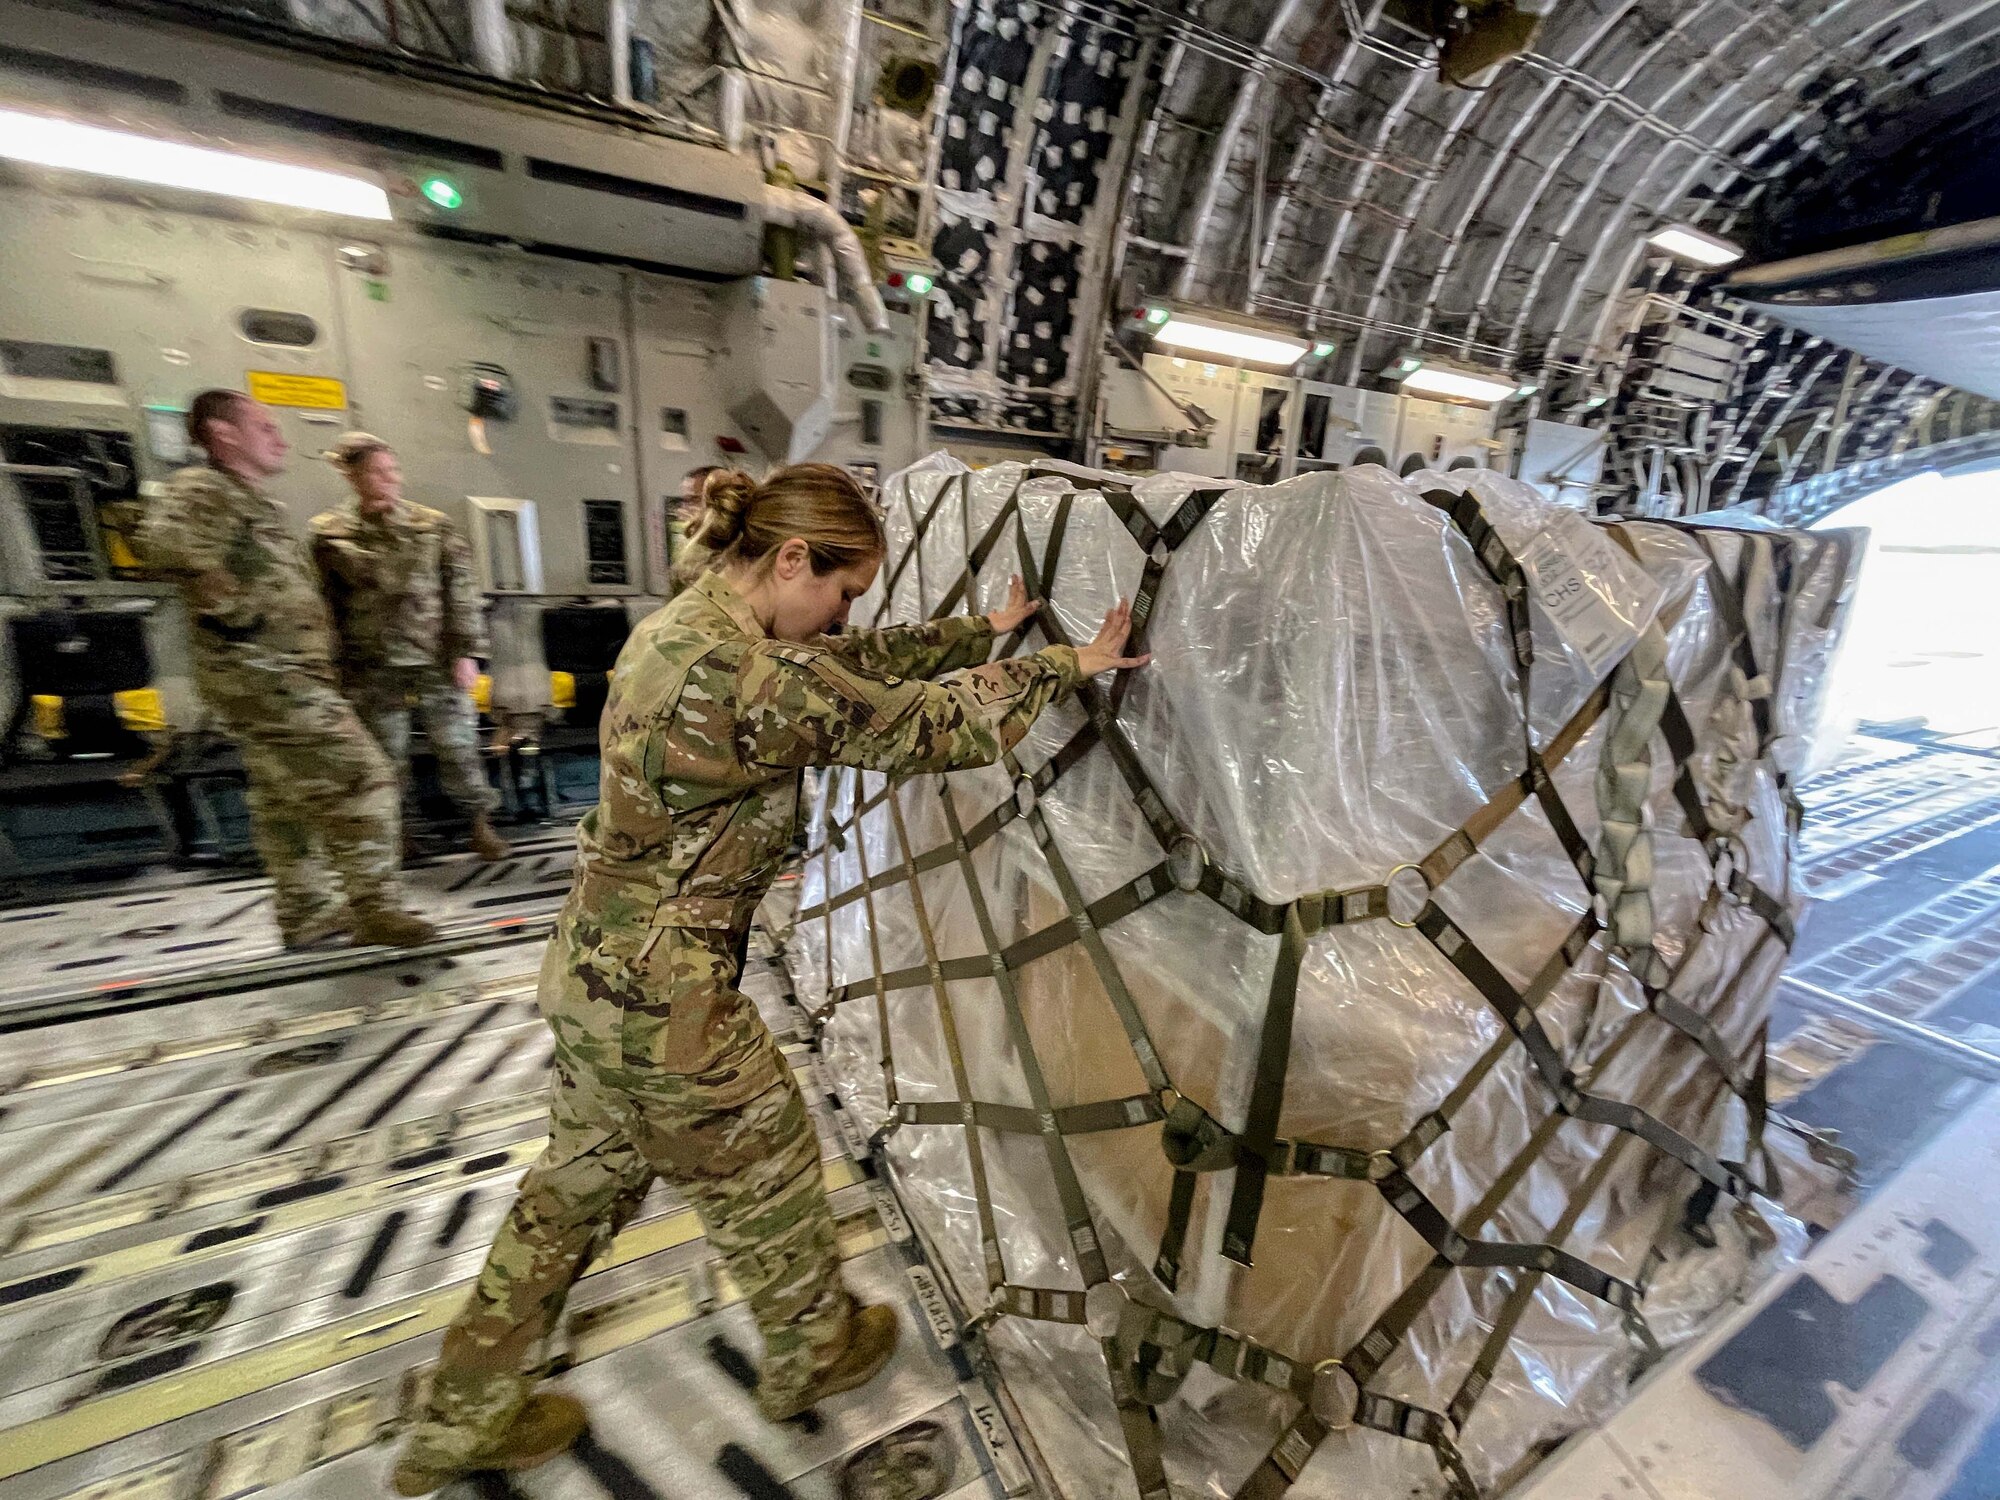 As Christmas quickly approaches, the people of Belize received a much needed gift, in the form of nearly 7,200 lbs. of medical aid delivered via Charleston based C-17.

The donated humanitarian aid, consisting of mostly surgical equipment, was delivered by the 315th Airlift Wing from Joint Base Charleston, S.C., and was estimated to help more than a half-million people in Belize.